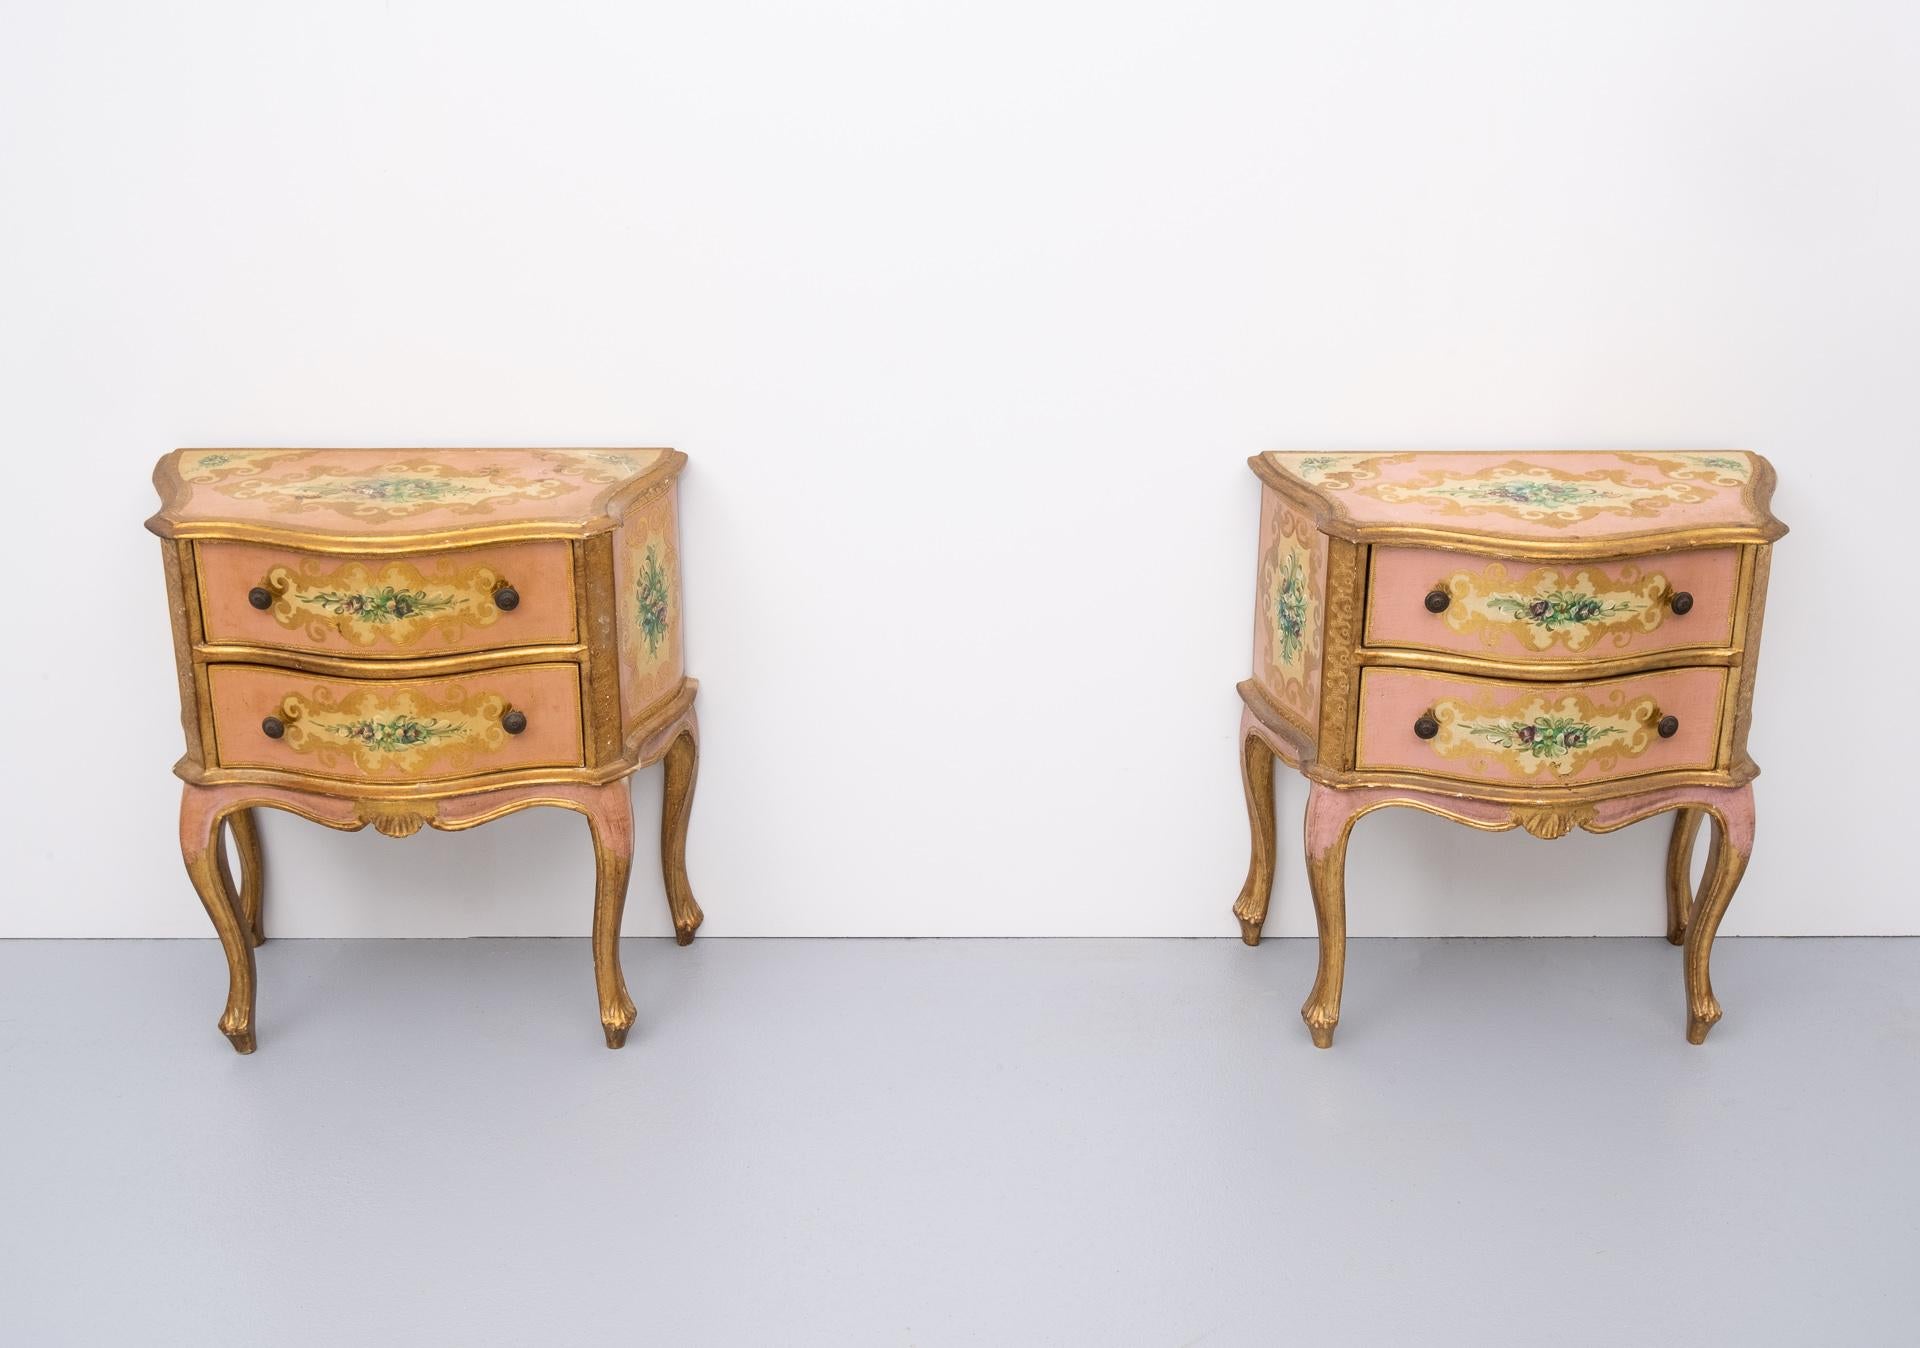 Two very nice Italian Florentine nightstands. Pink base color, gilded wood, hand painted flowers.
Two drawers each.